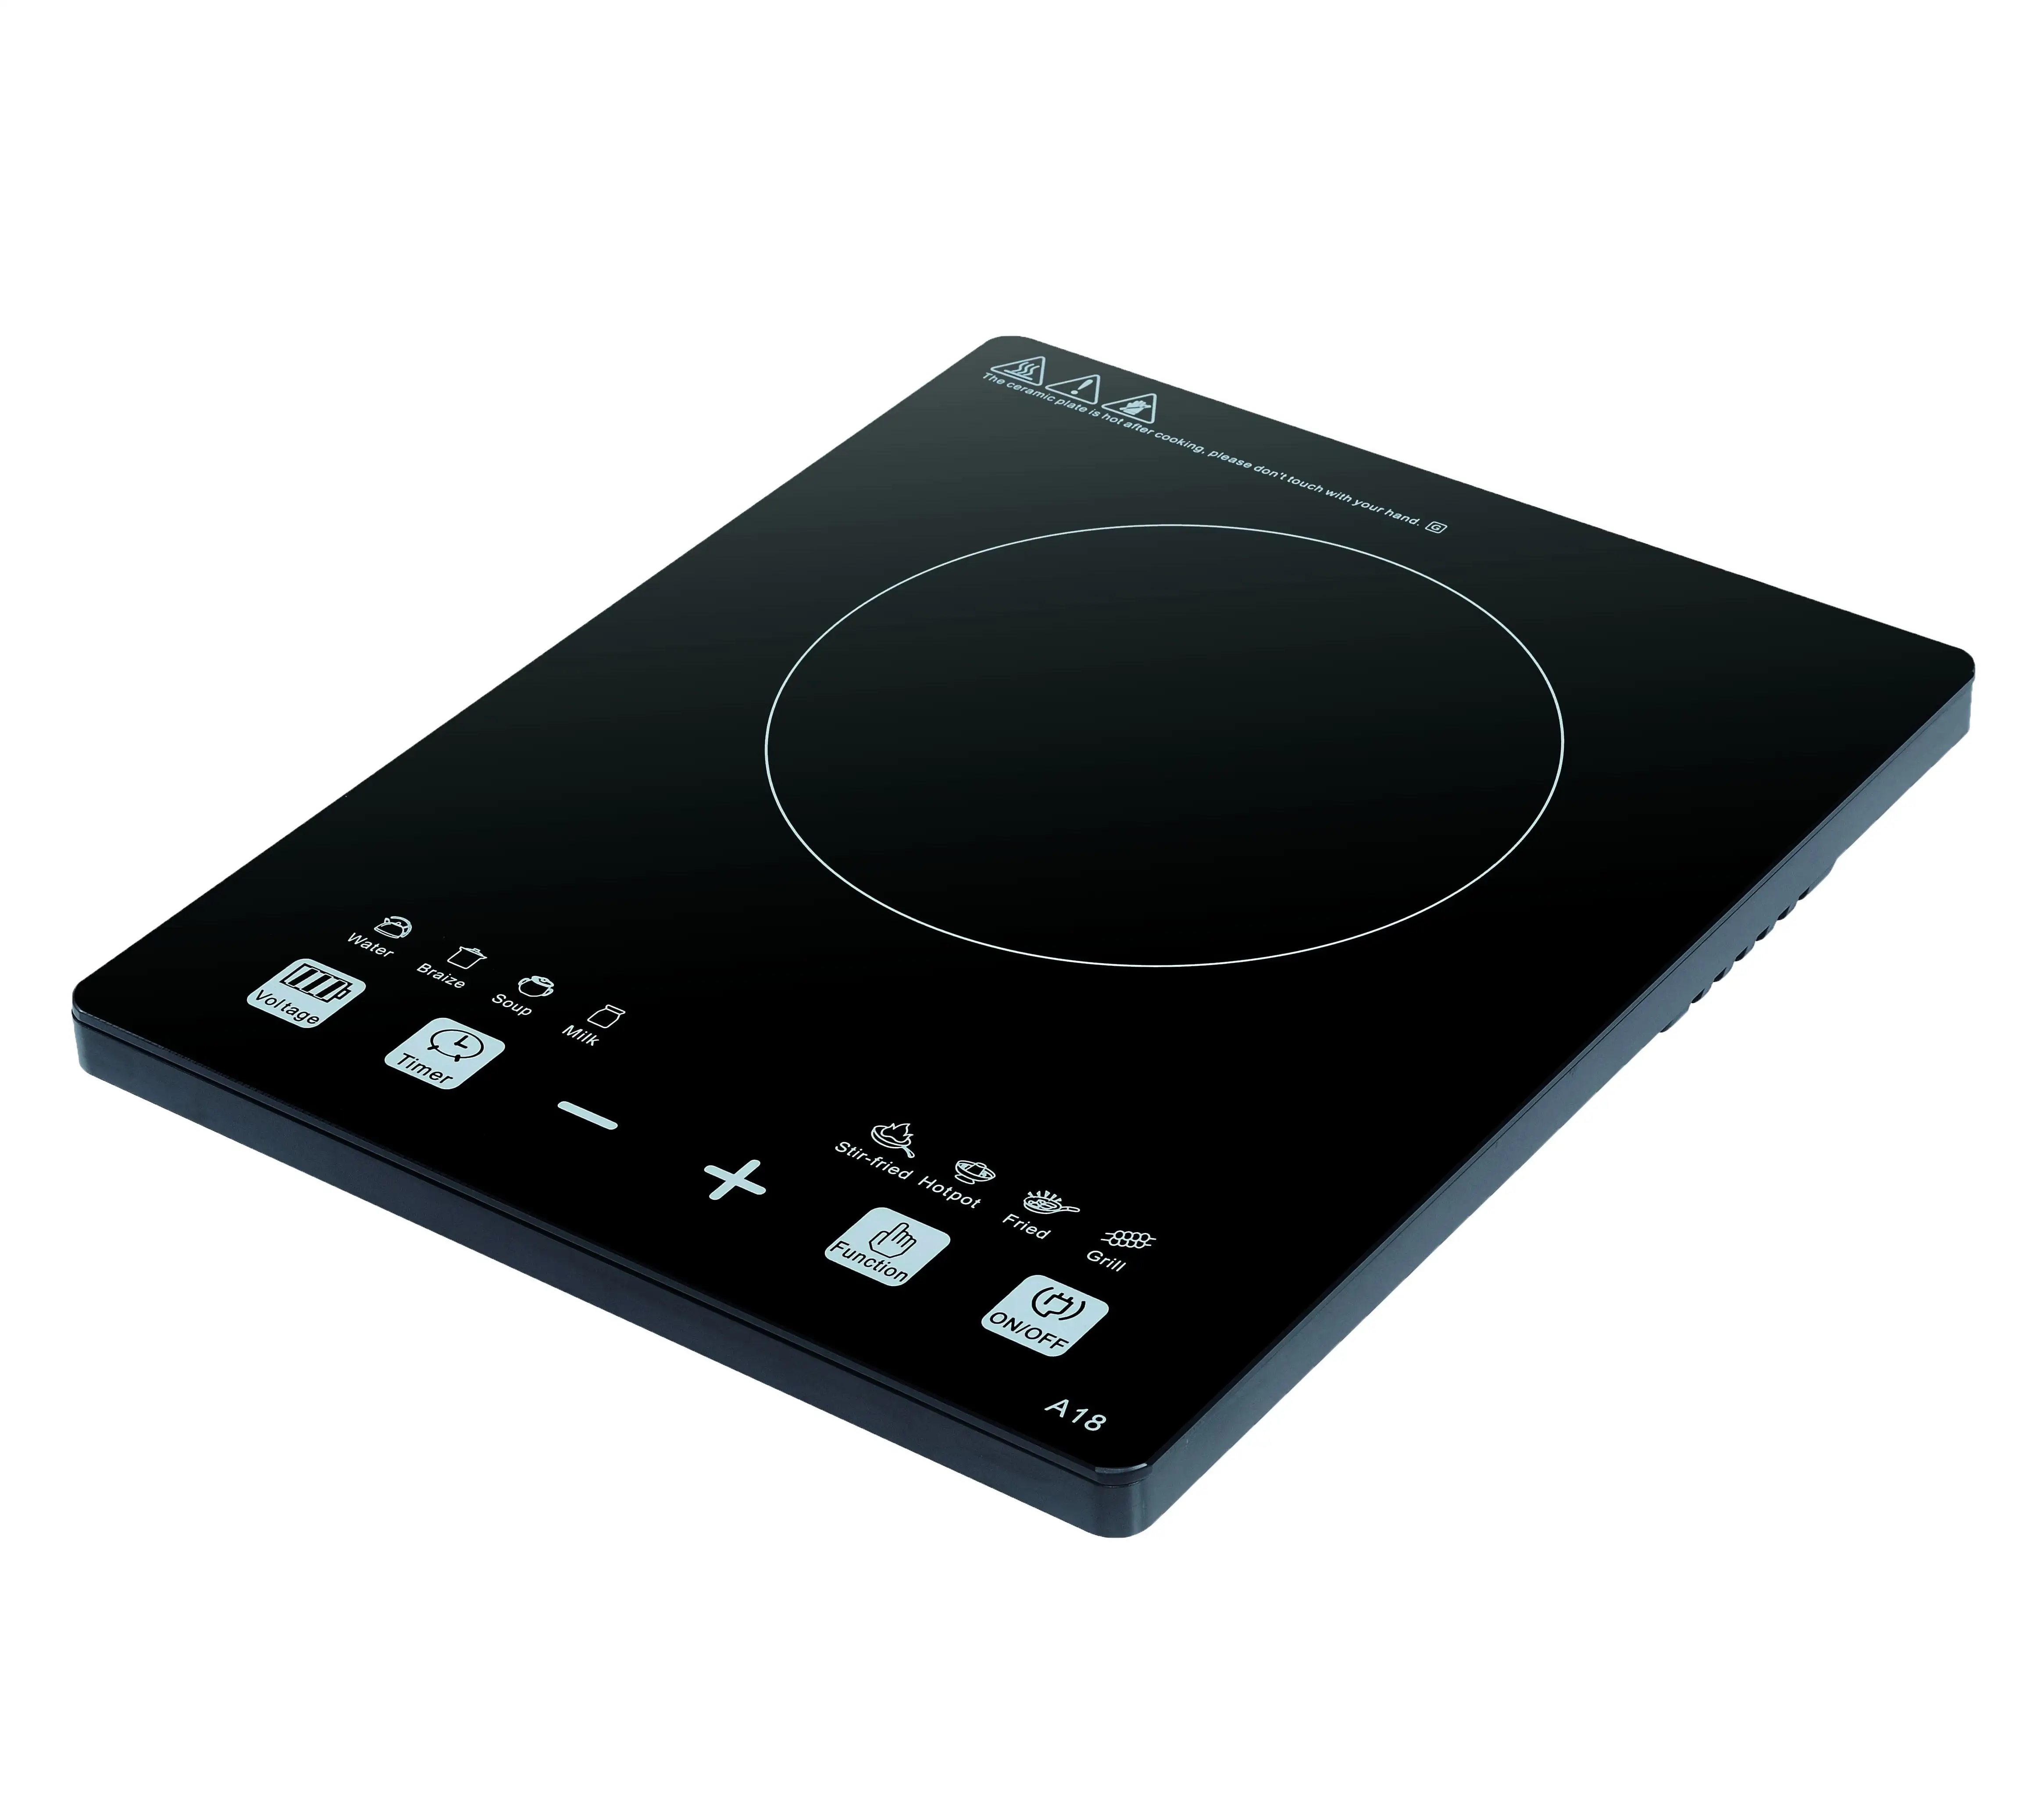 Can be OEM 110V / 900W, 220V / 1800W induction cookers family practical electric induction cooker